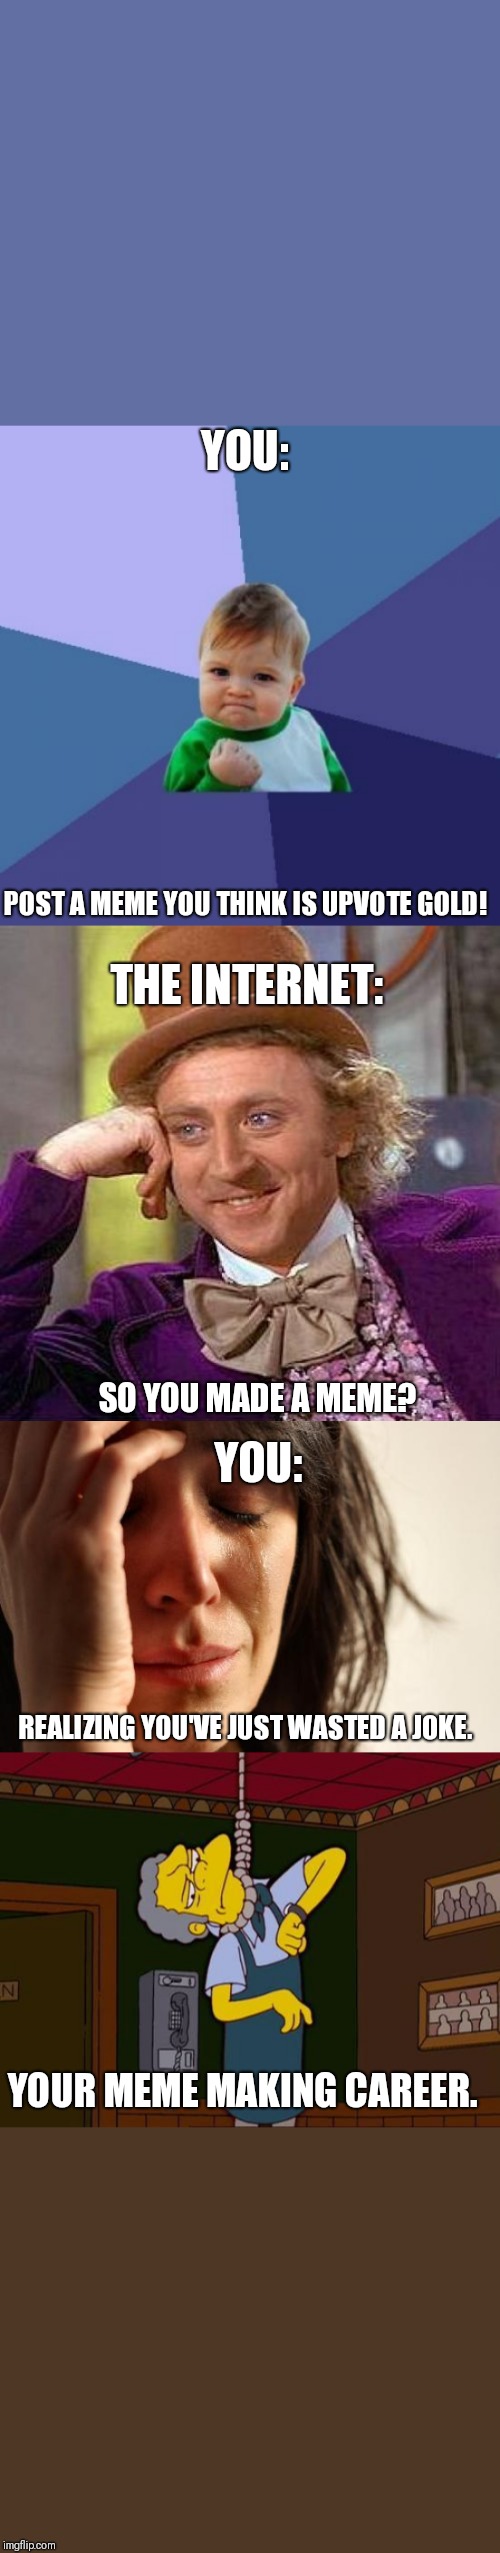 Why so serious? | YOU:; POST A MEME YOU THINK IS UPVOTE GOLD! THE INTERNET:; SO YOU MADE A MEME? YOU:; REALIZING YOU'VE JUST WASTED A JOKE. YOUR MEME MAKING CAREER. | image tagged in memes,first world problems,success kid,creepy condescending wonka,simpsons moe noose | made w/ Imgflip meme maker